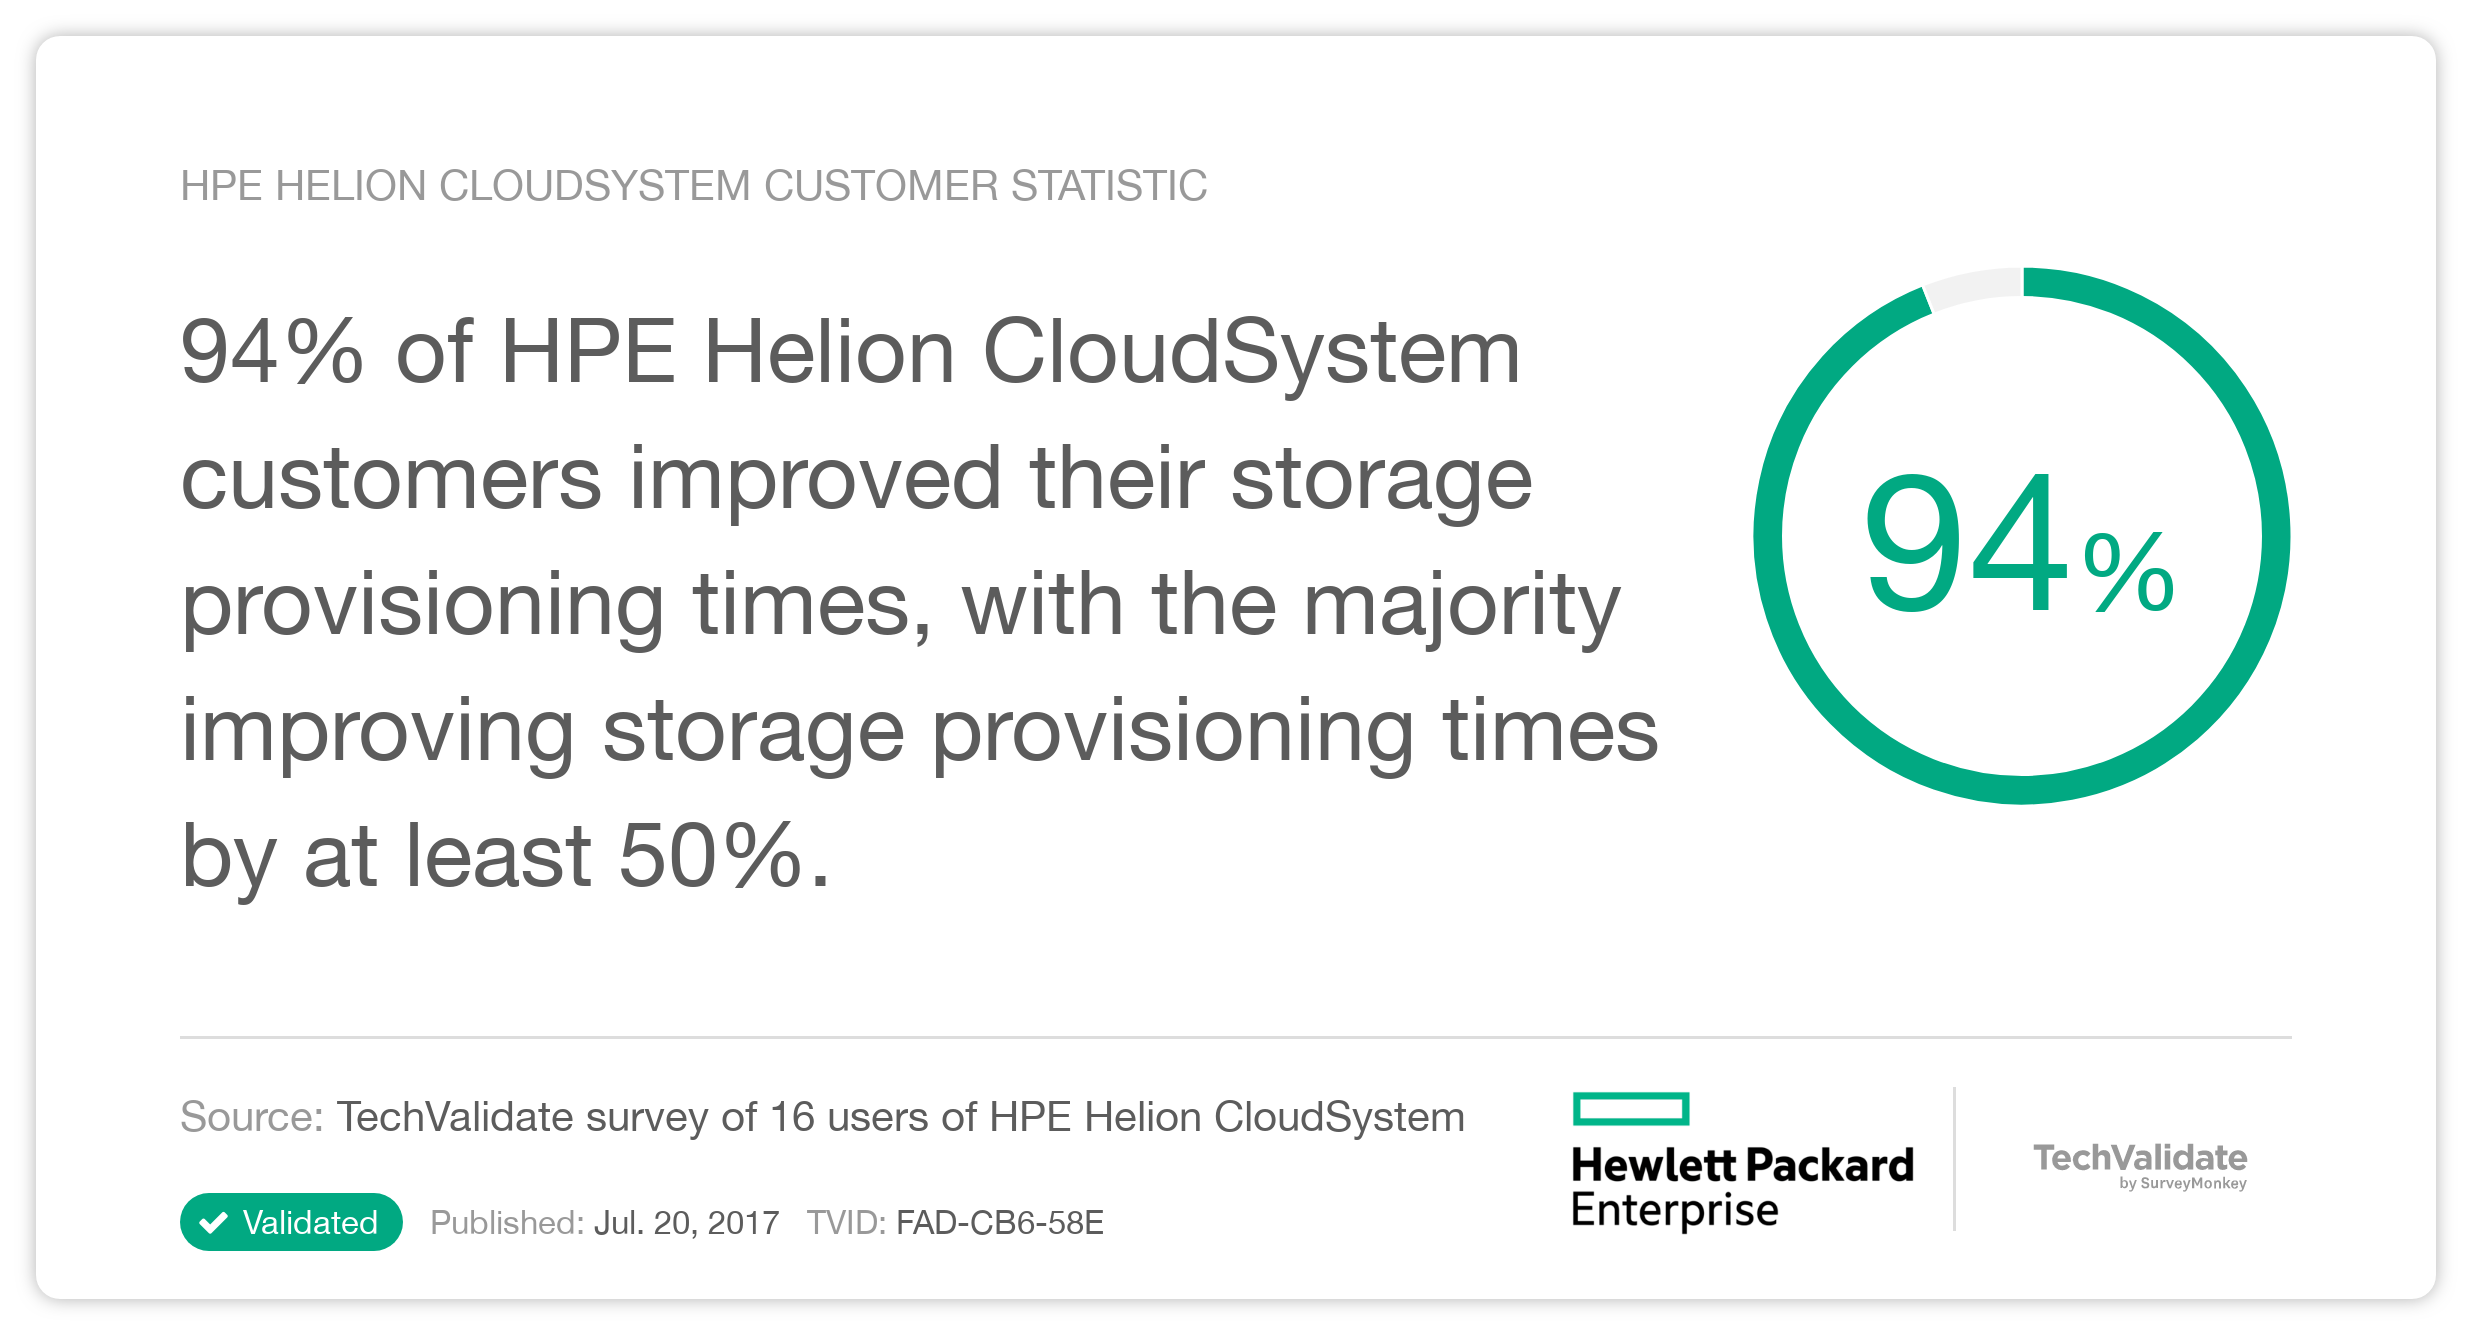 HPE Helion CloudSystem Customer Statistic